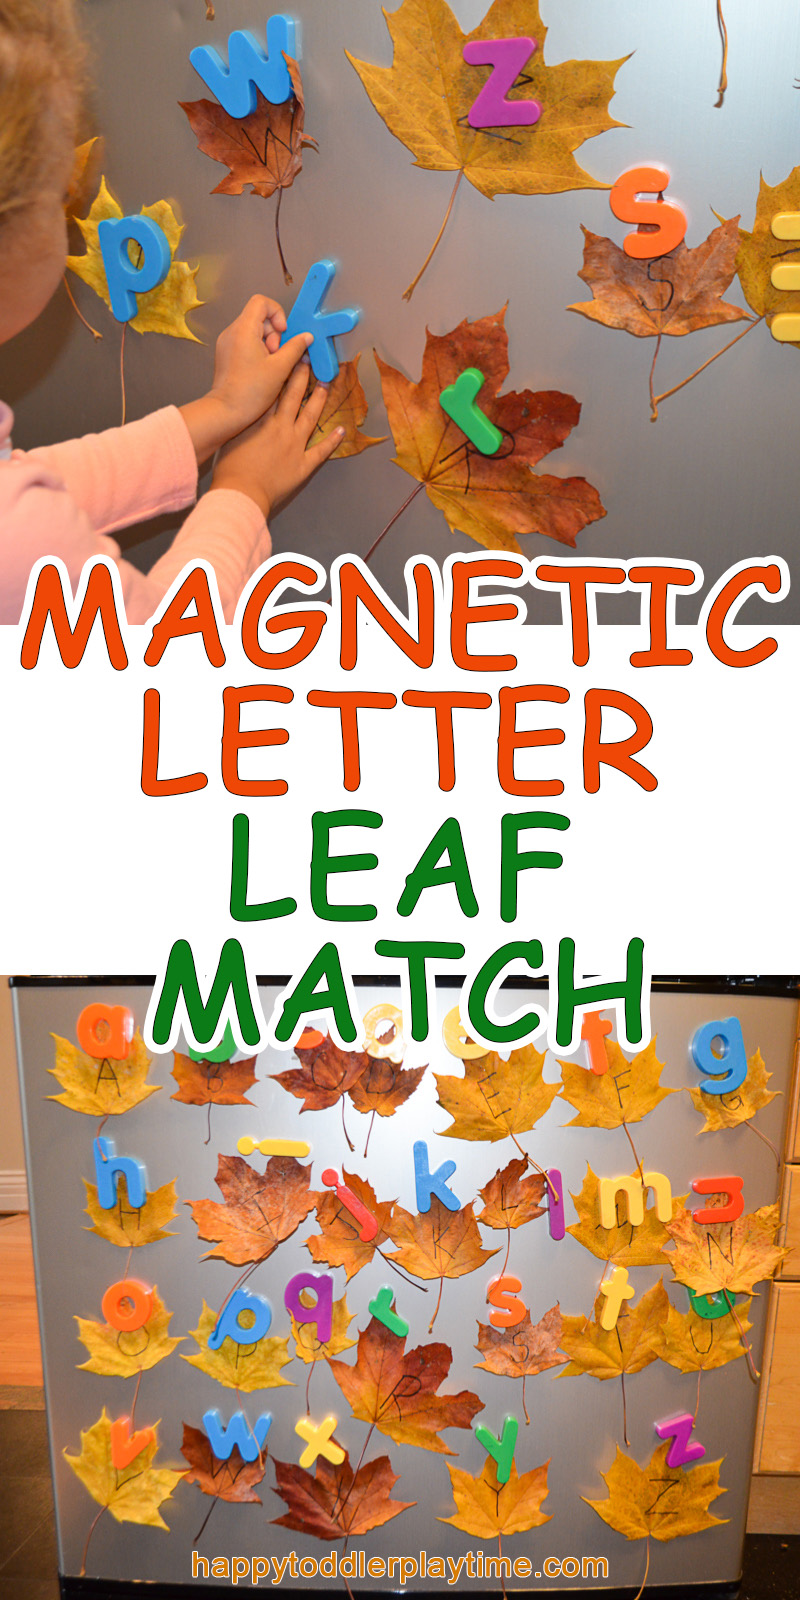 Magnetic Letter Leaf Match for toddlers and preschoolers